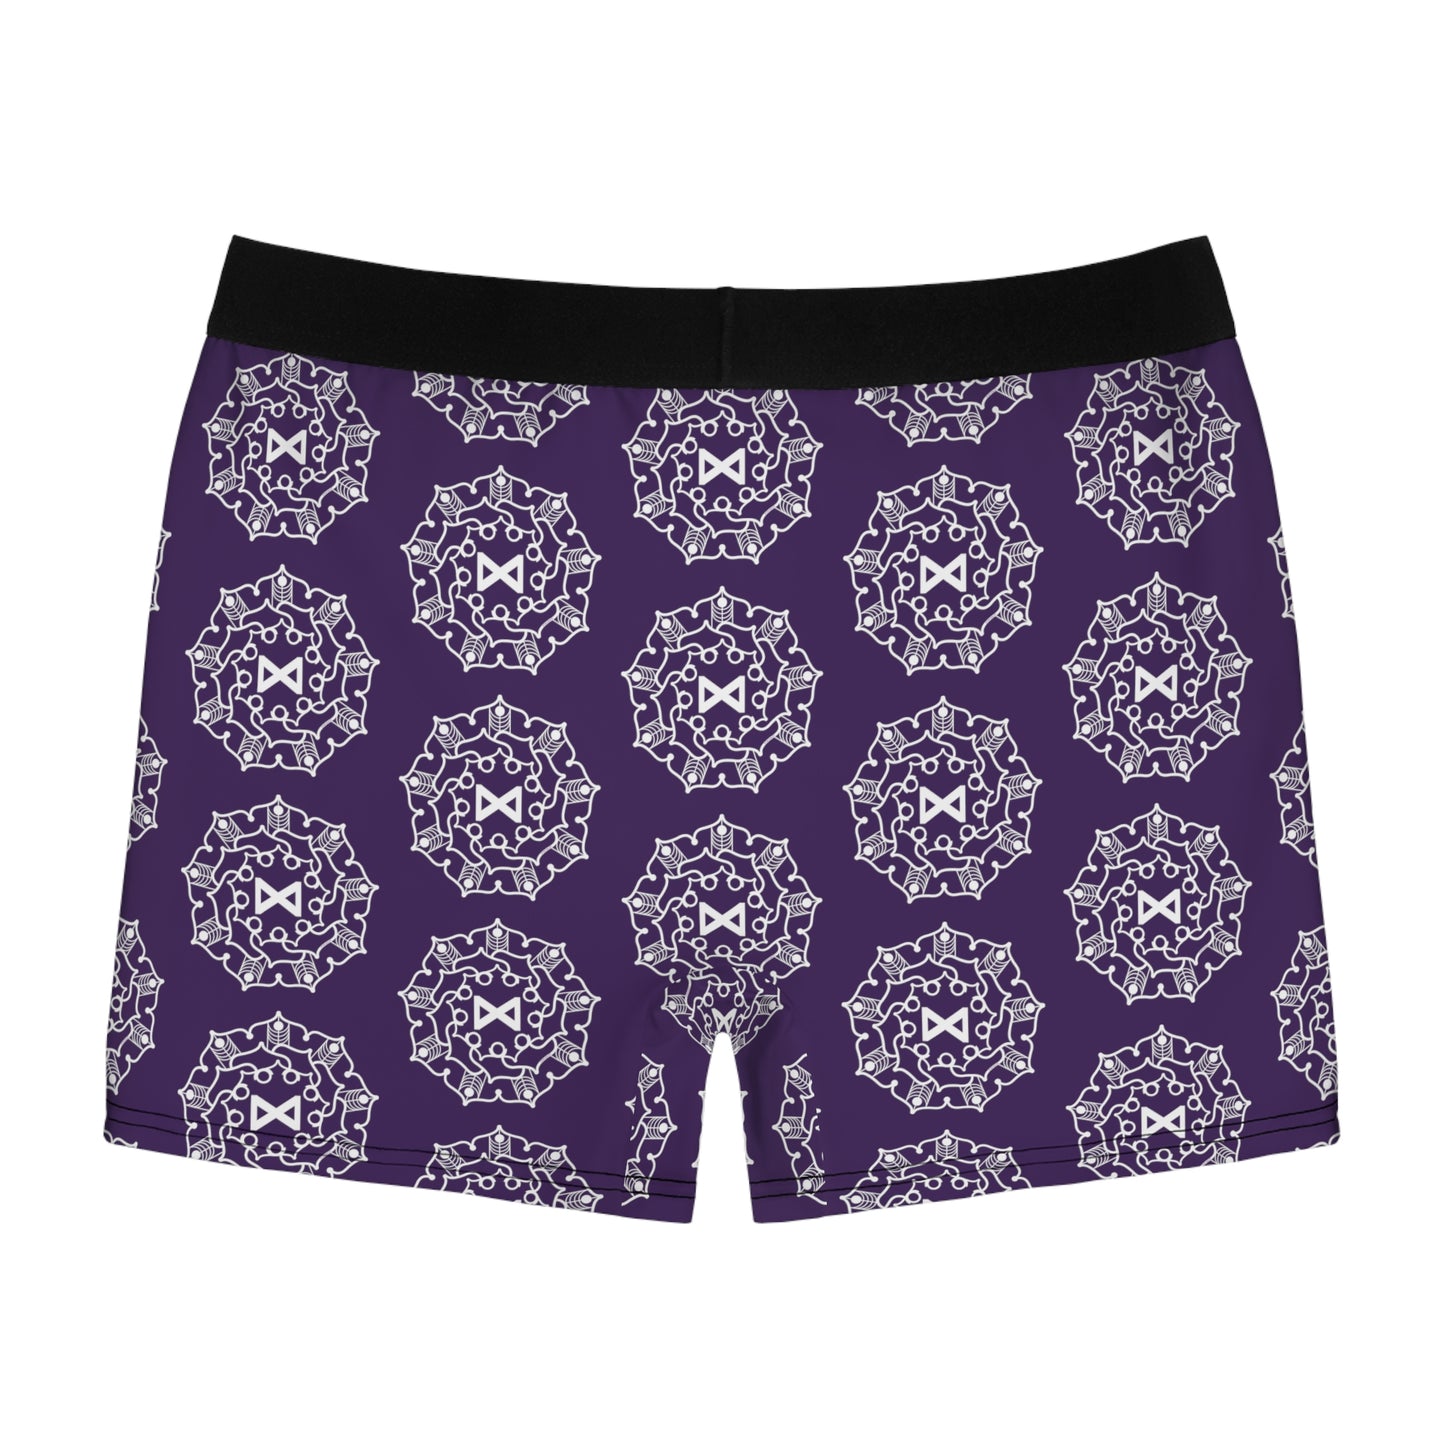 Spellcaster by Patti Negri Mackical Men's Boxer Briefs - Intuition